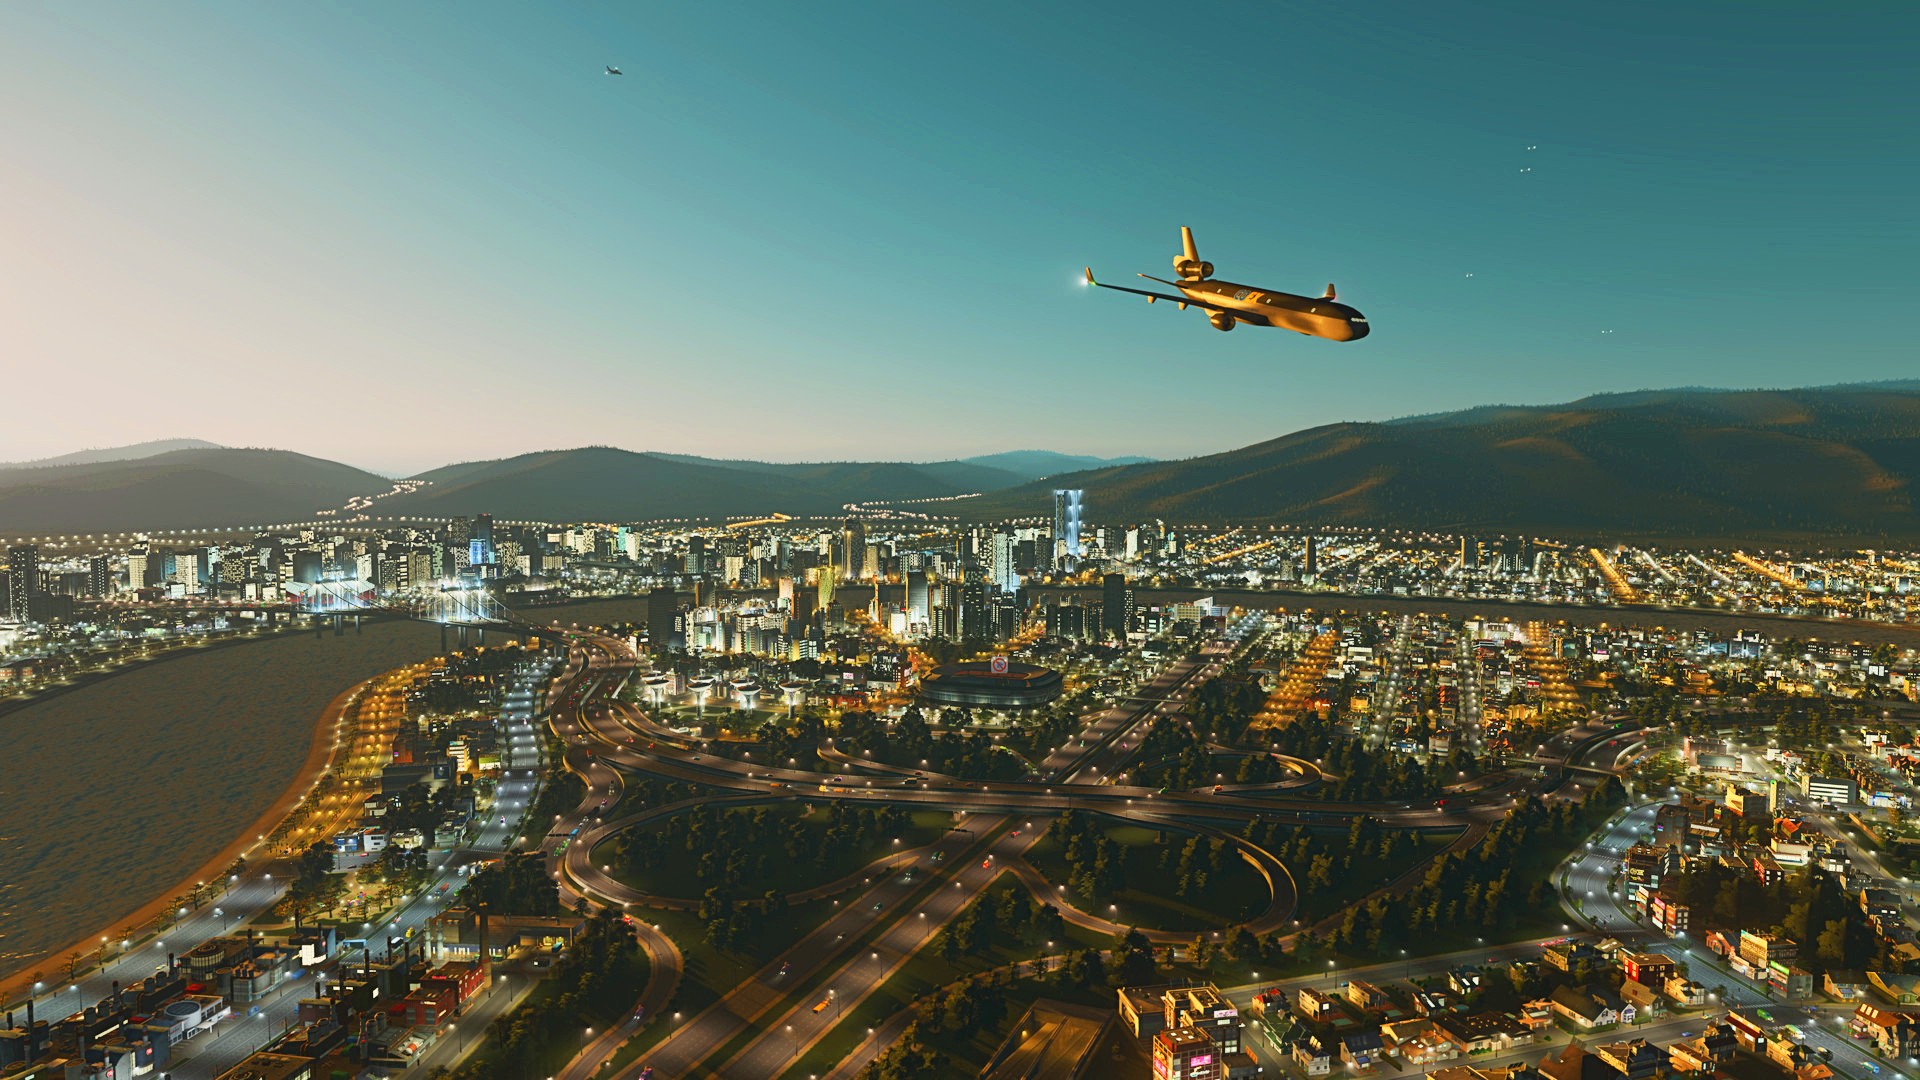 Cities: Skylines 2's zoning tools allow you to mix architectural styles and  zone types